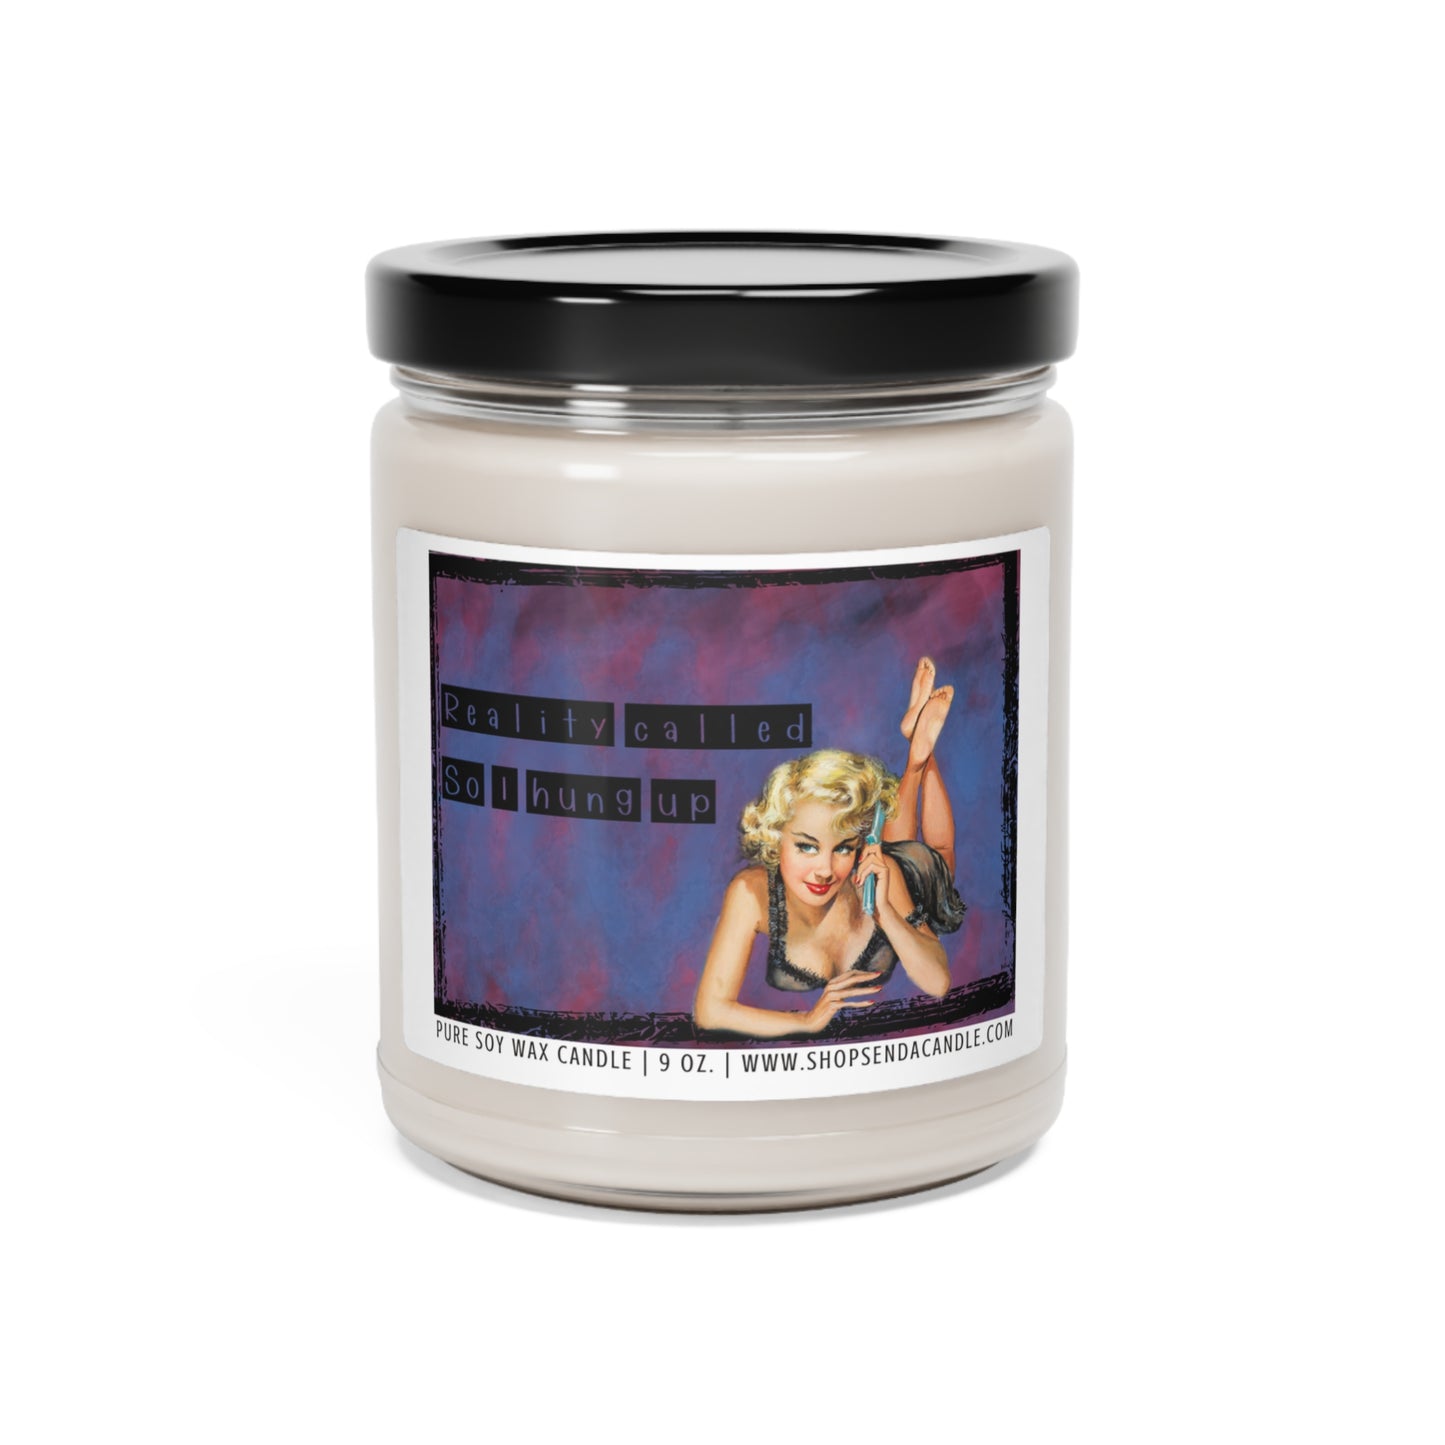 Gift Ideas For A Female Friend | Send A Candle